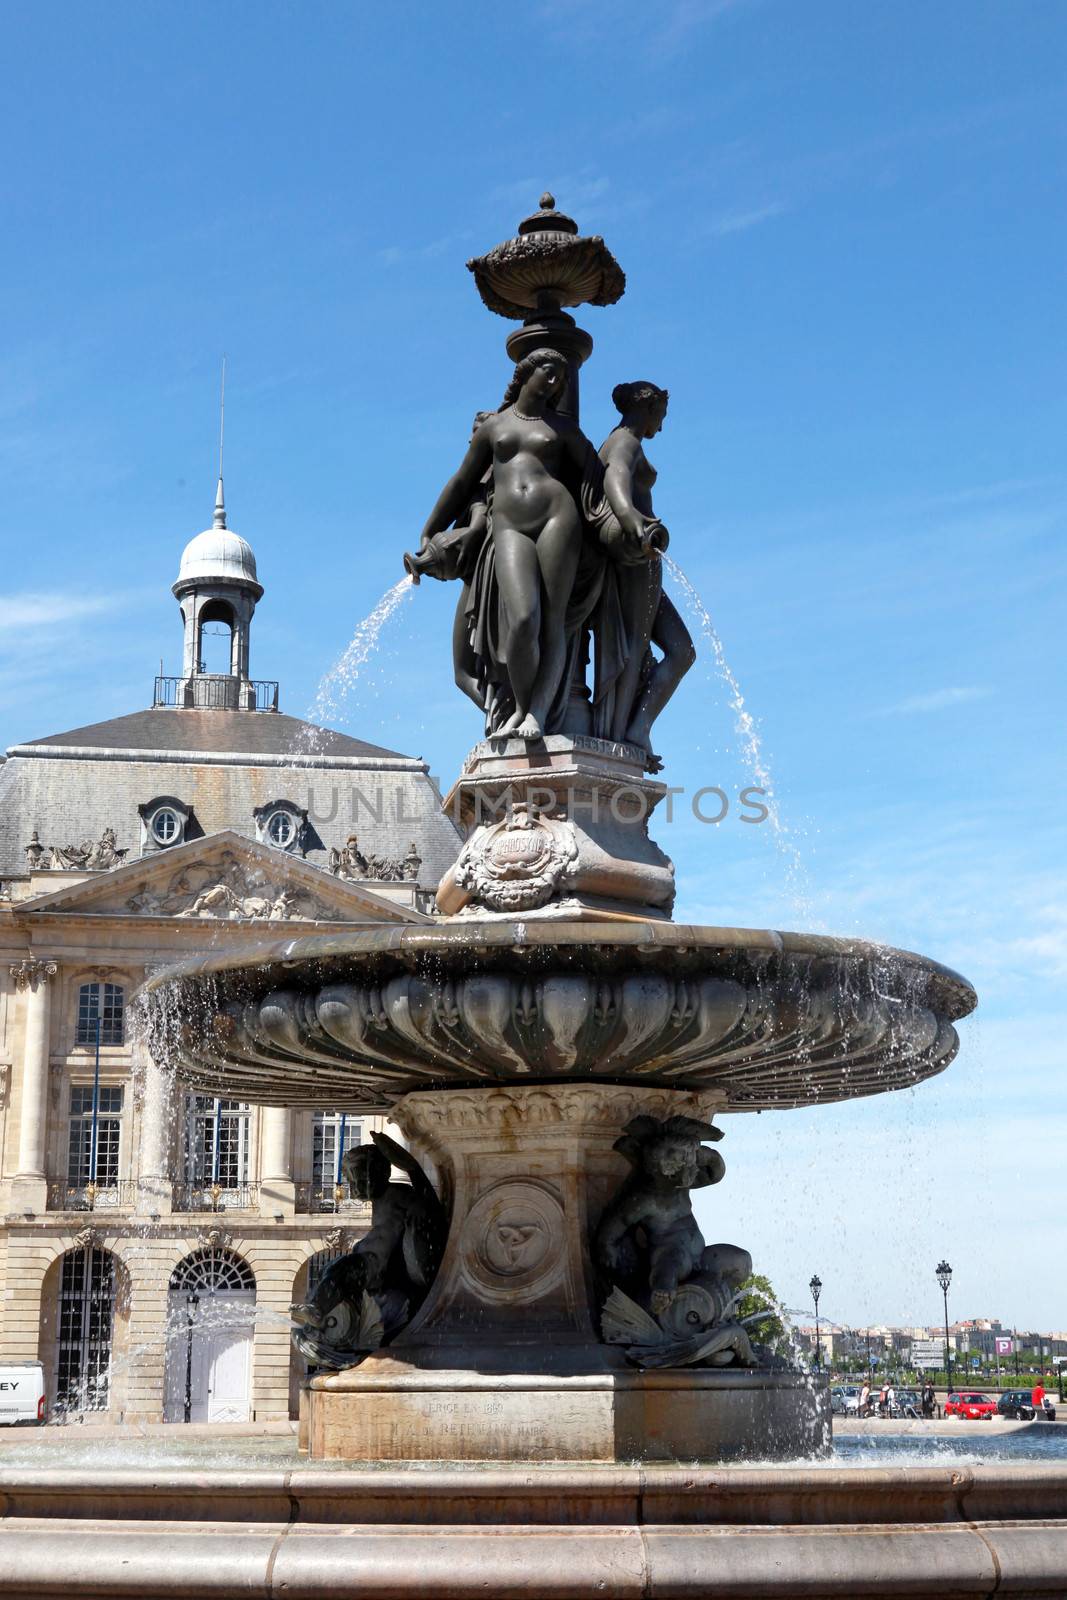 Town water fountain by phovoir